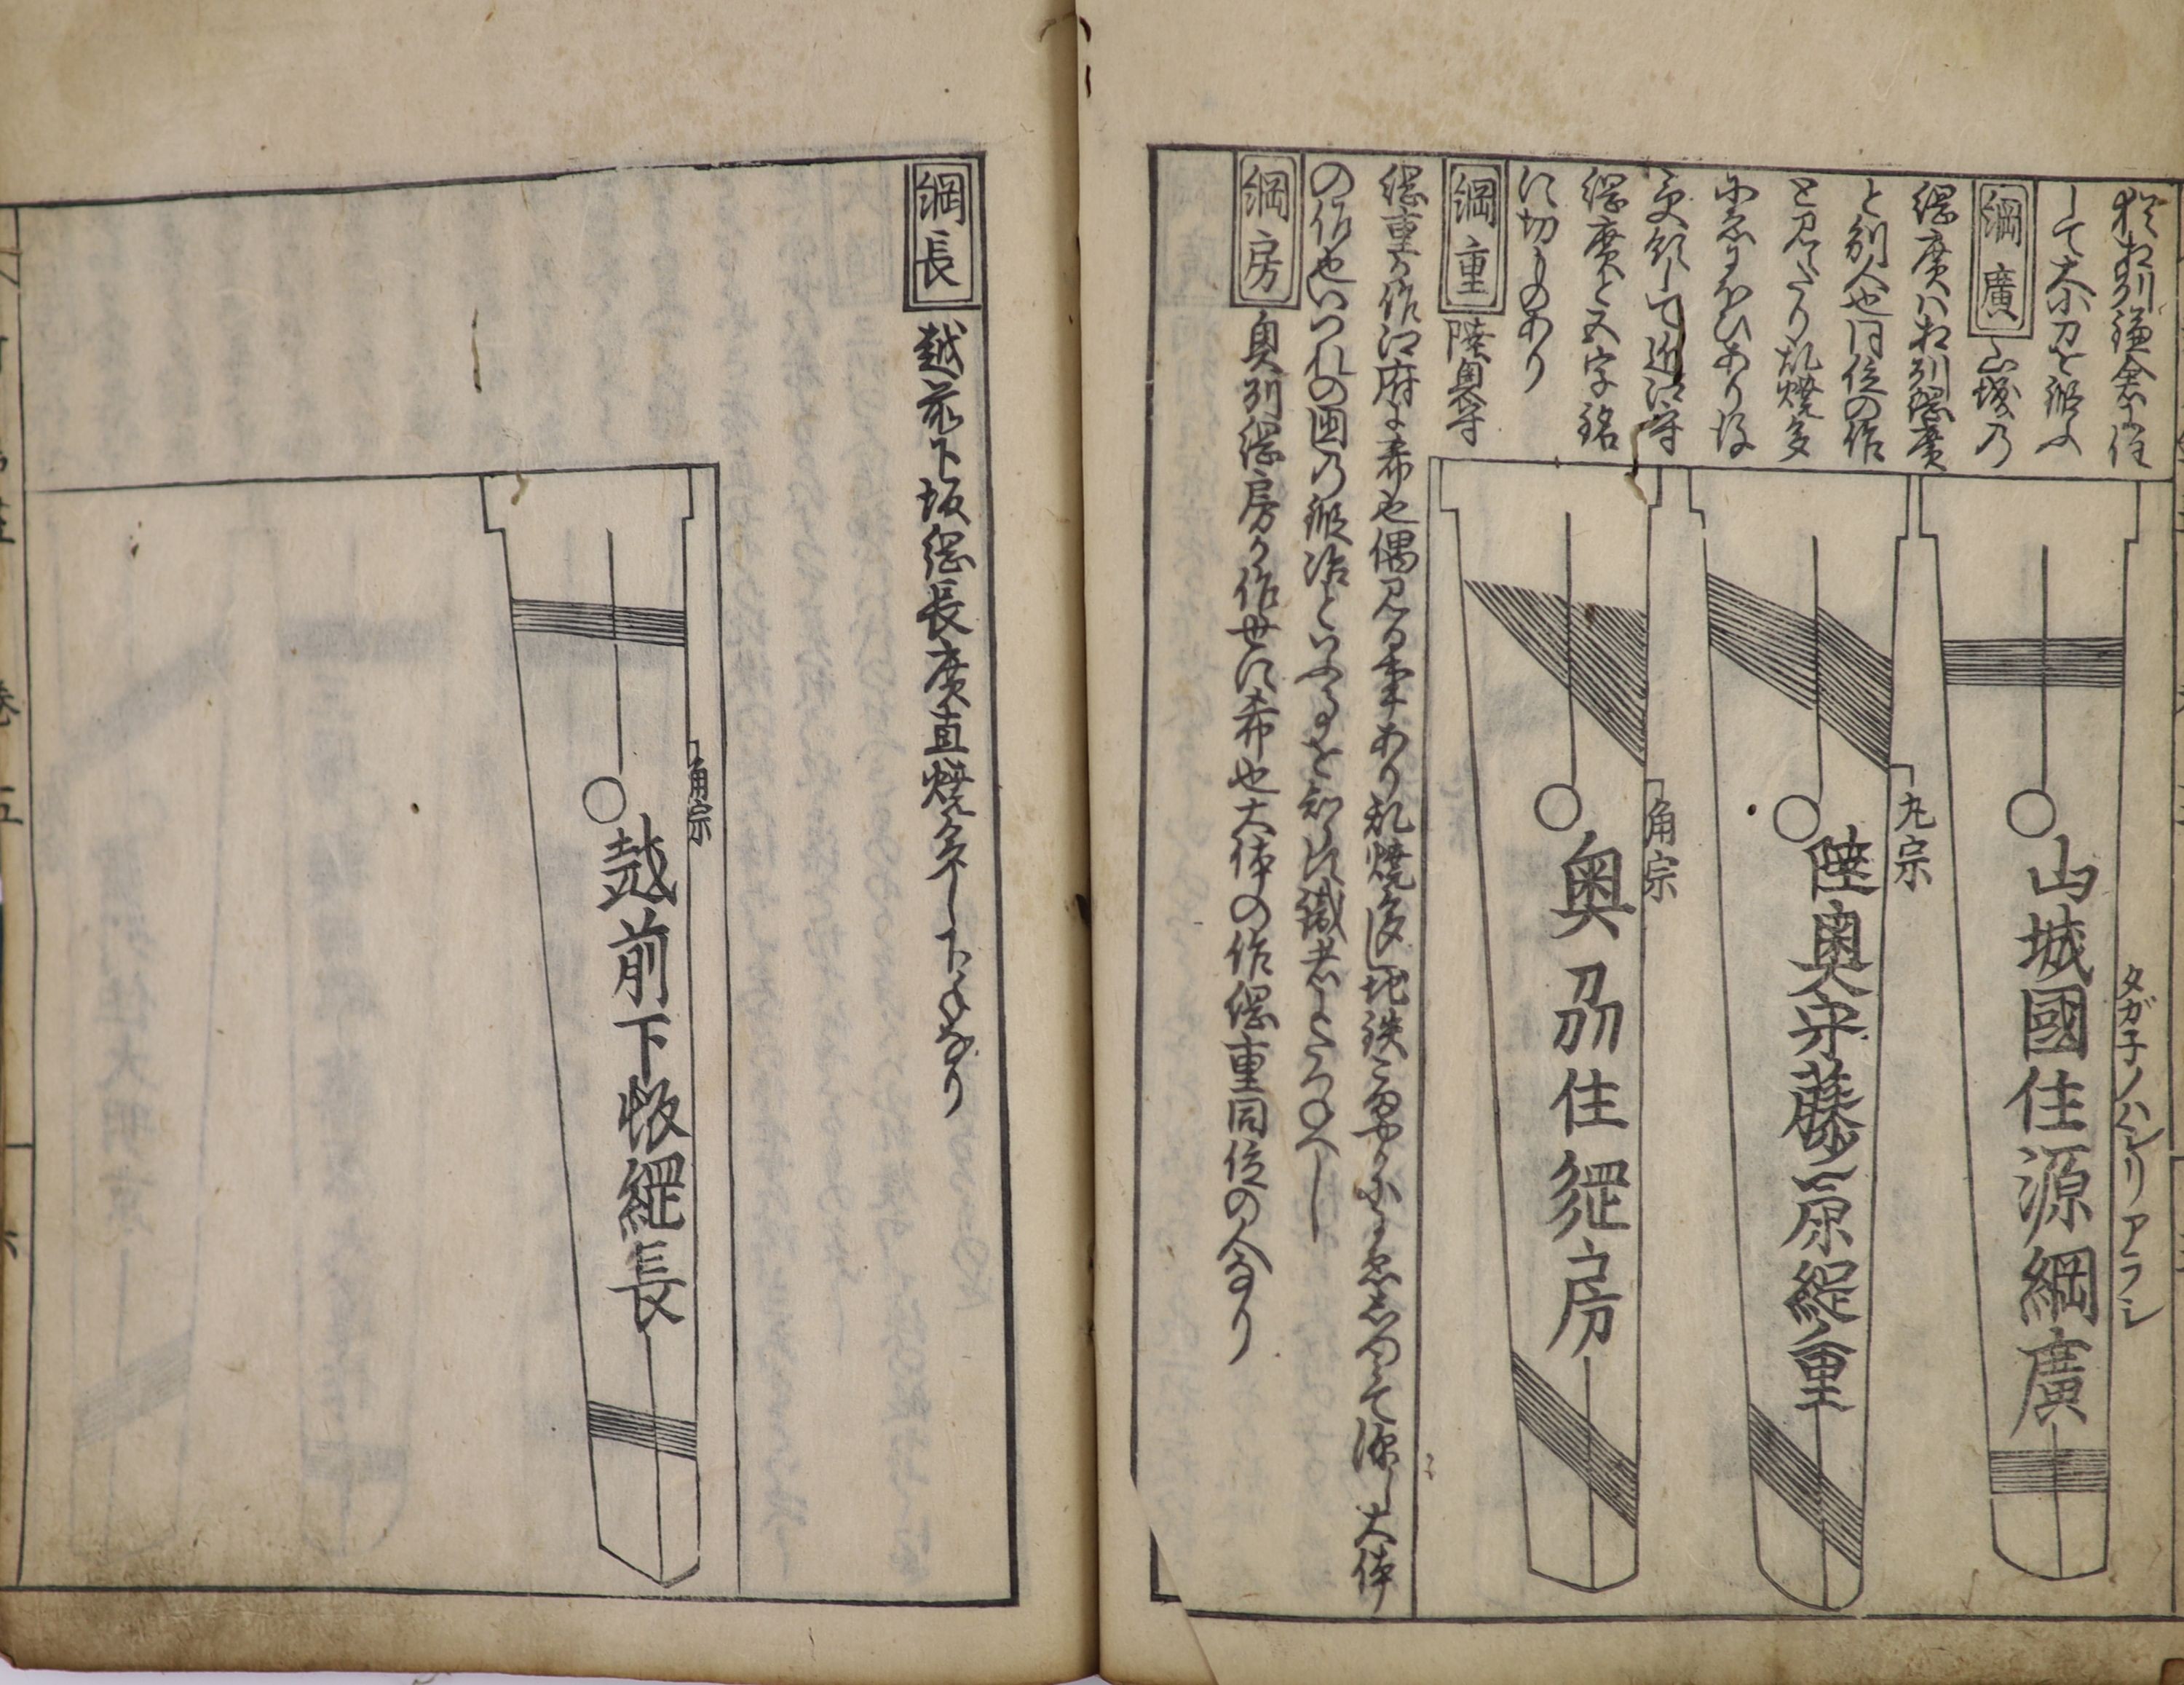 A set of five Japanese woodblock printed books of Samurai sword tang designs and examples of maker's marks, 19th century, 26.5 cm x 18 cm, faults